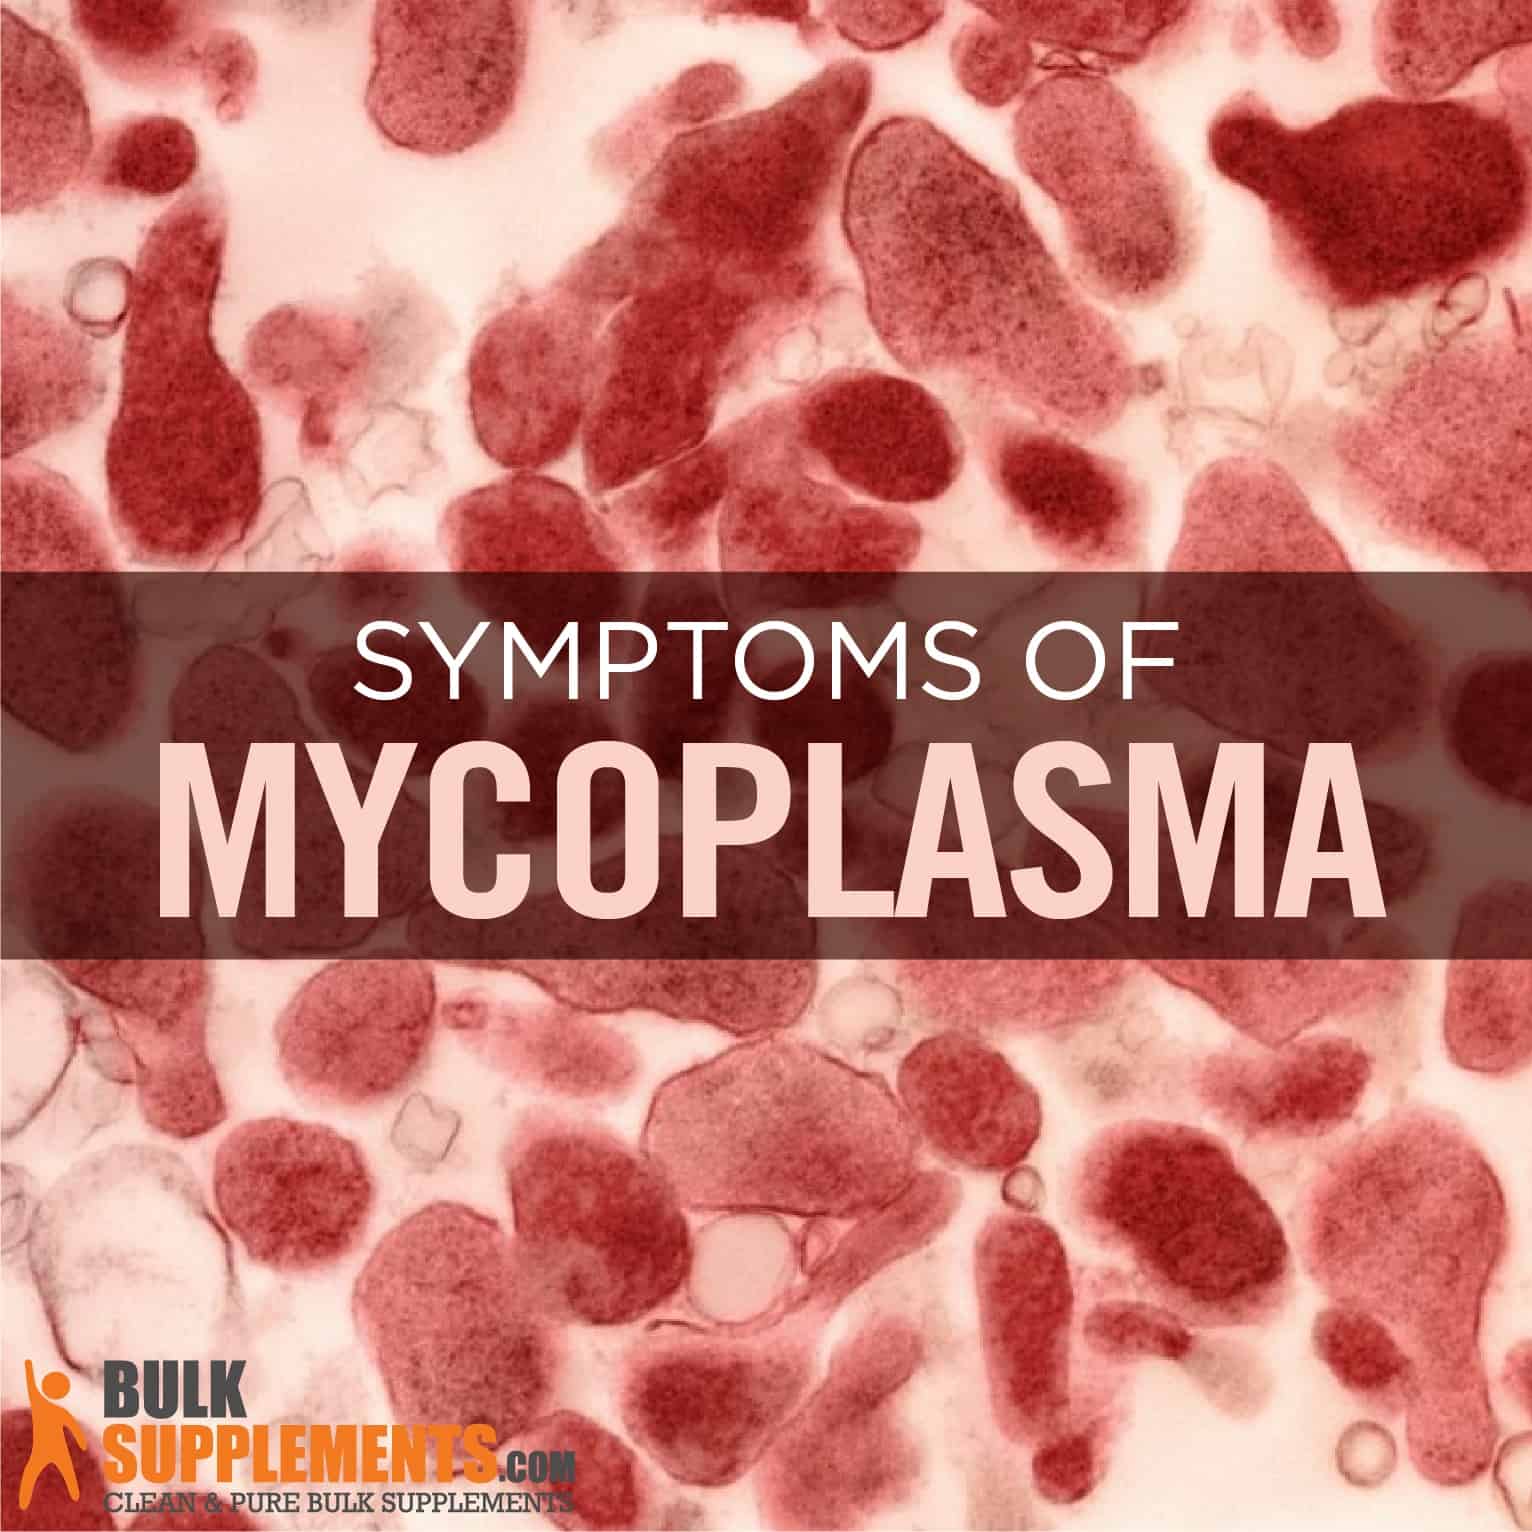 Mycoplasma Infection. Boost Your Immune System With Our Supplements